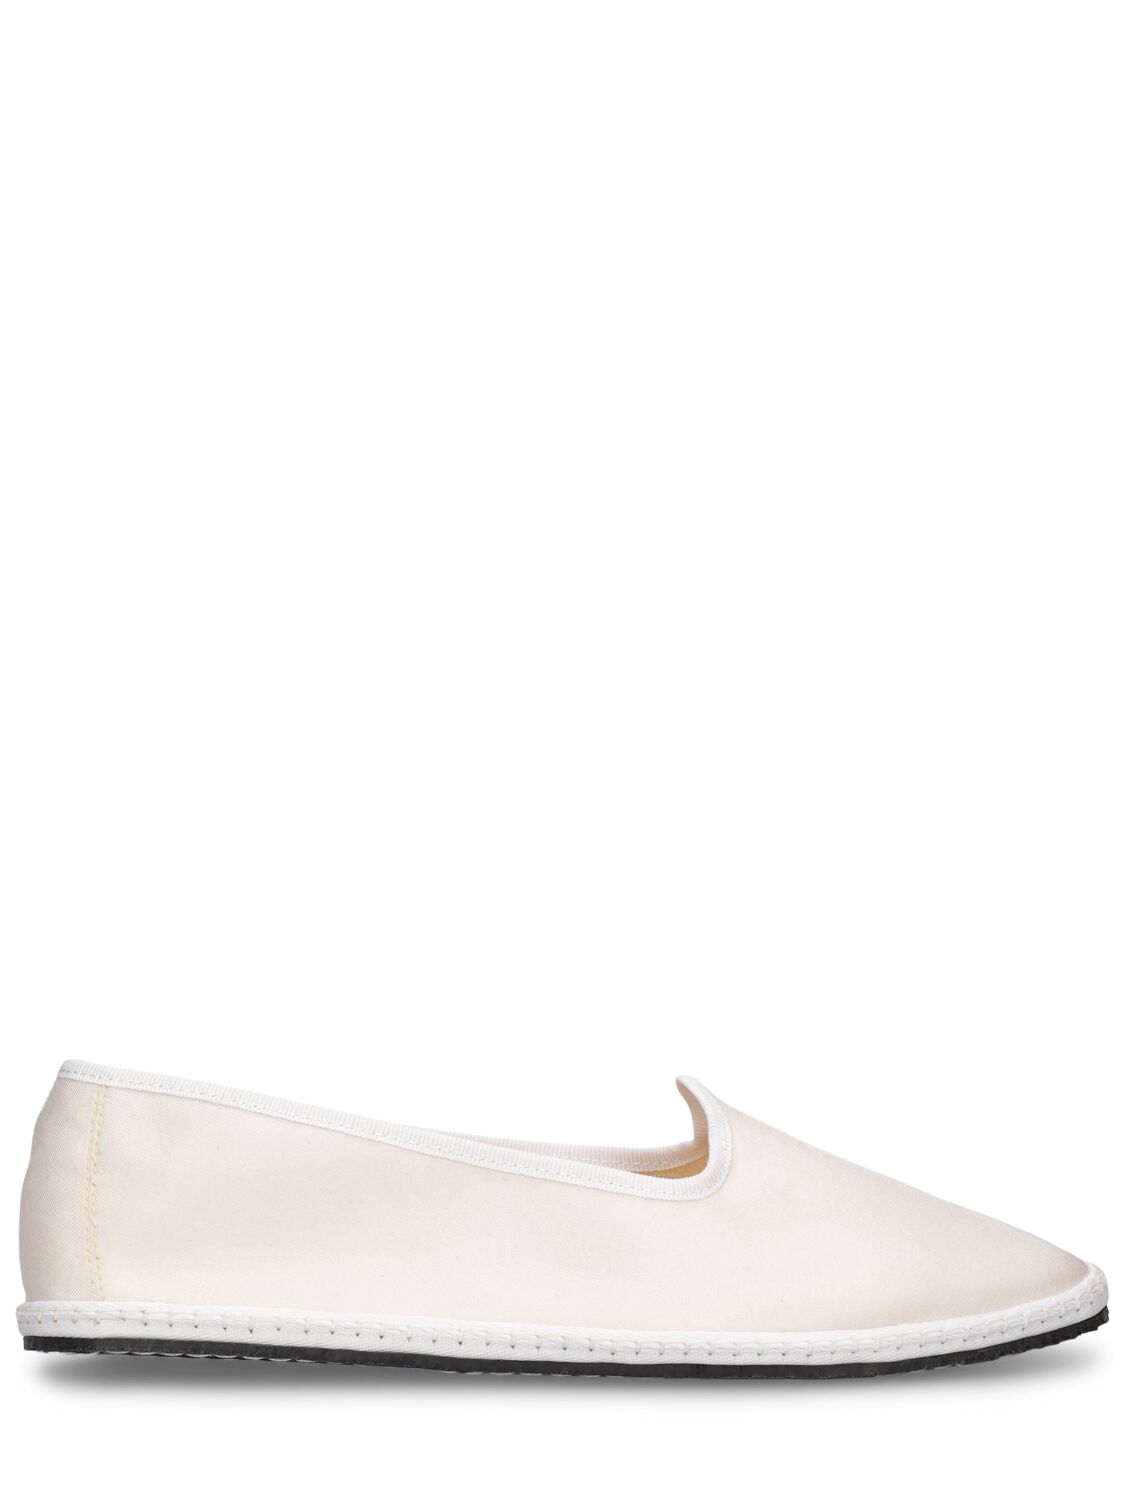 Image of 10mm Snow White Satin Loafers